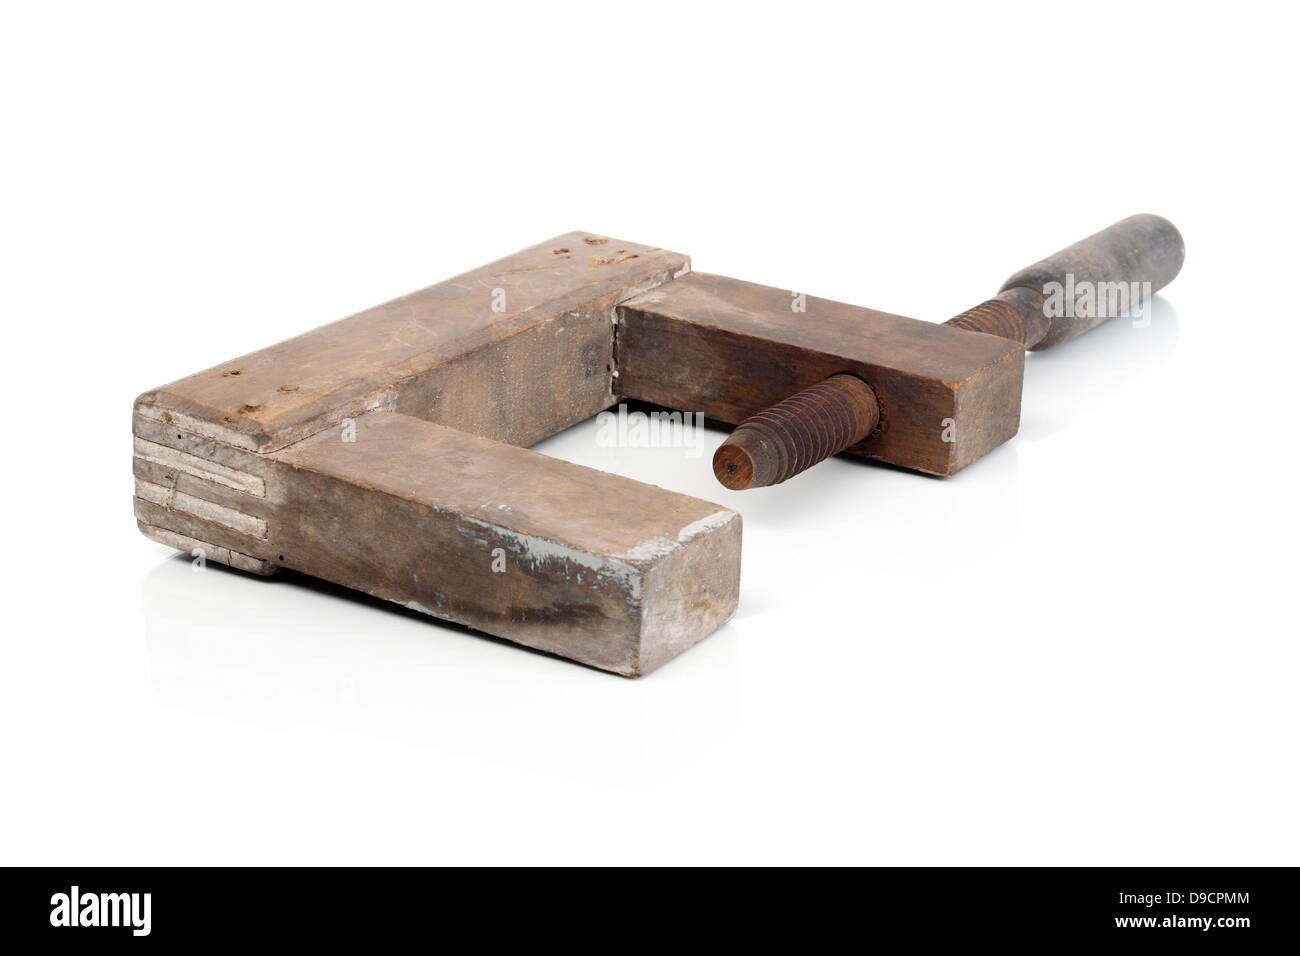 Old vice, Old Clamp, Stock Photo